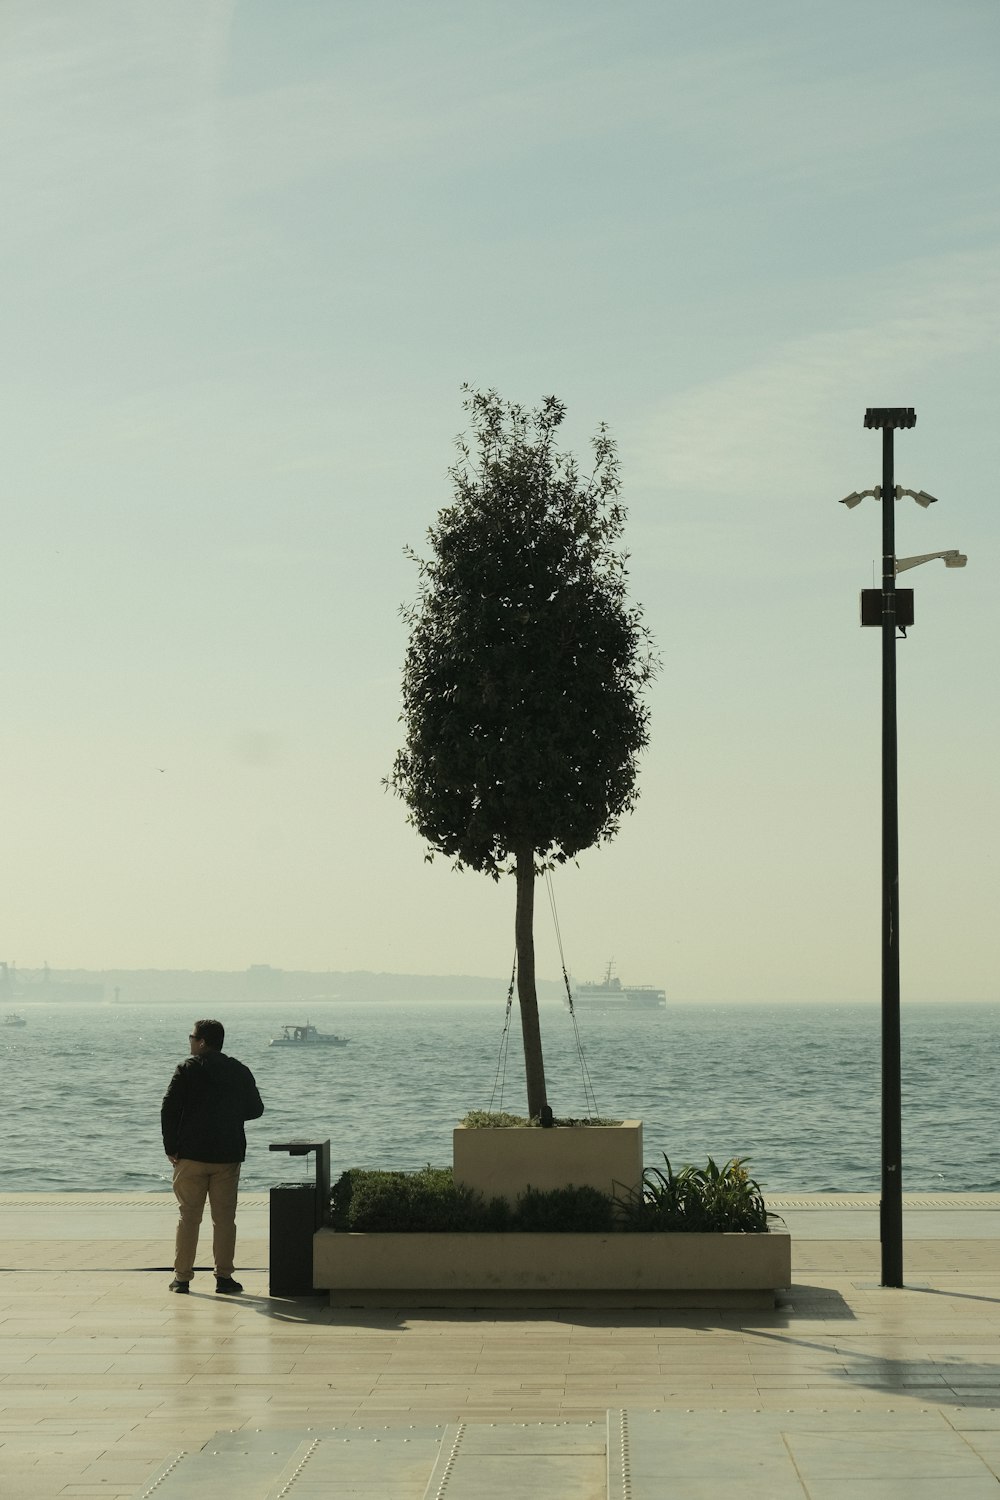 a man standing next to a tree near the ocean